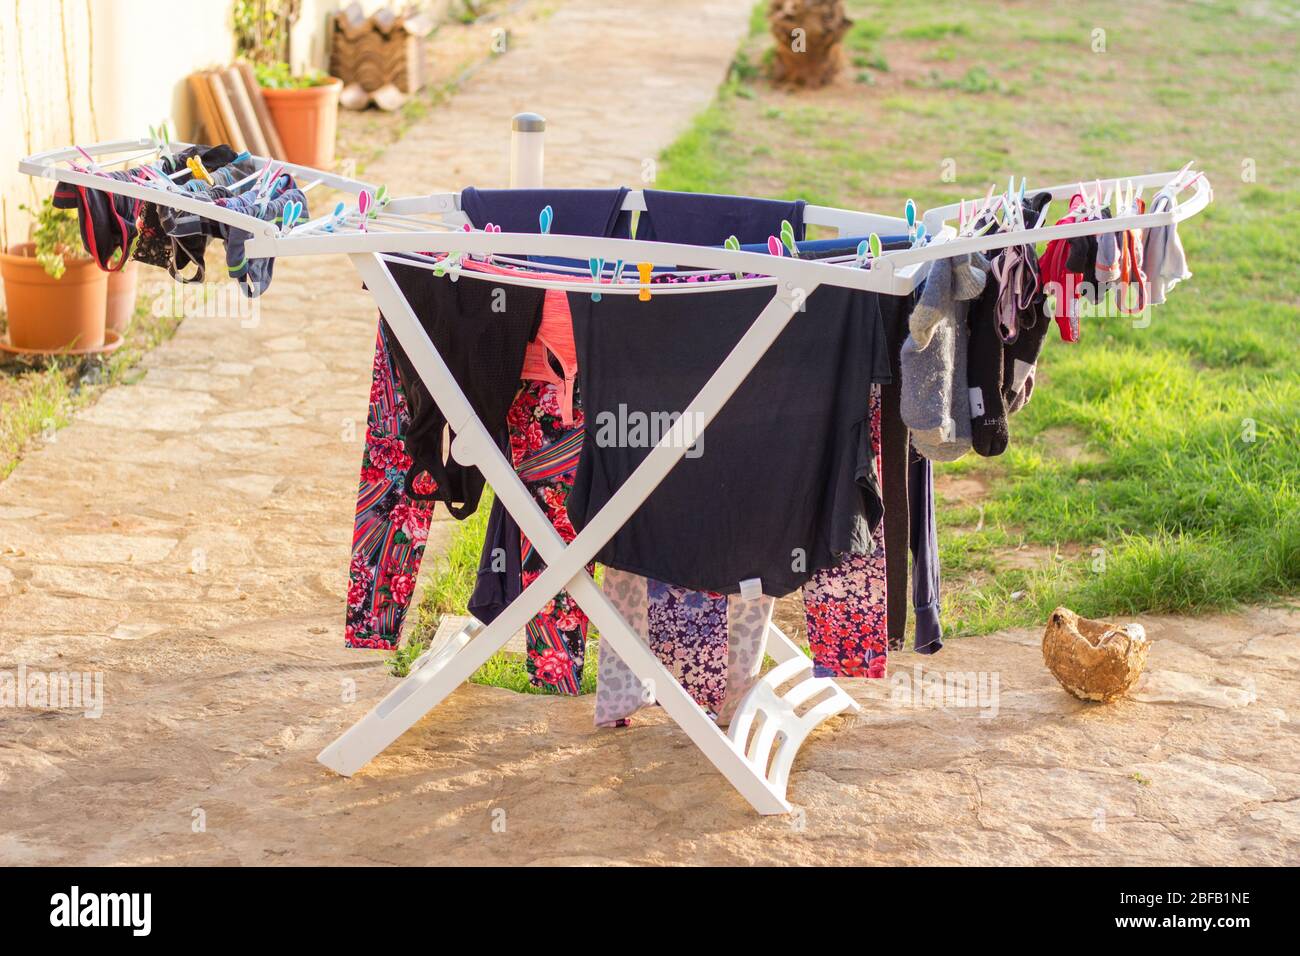 Air drying laundry on summer day Stock Photo